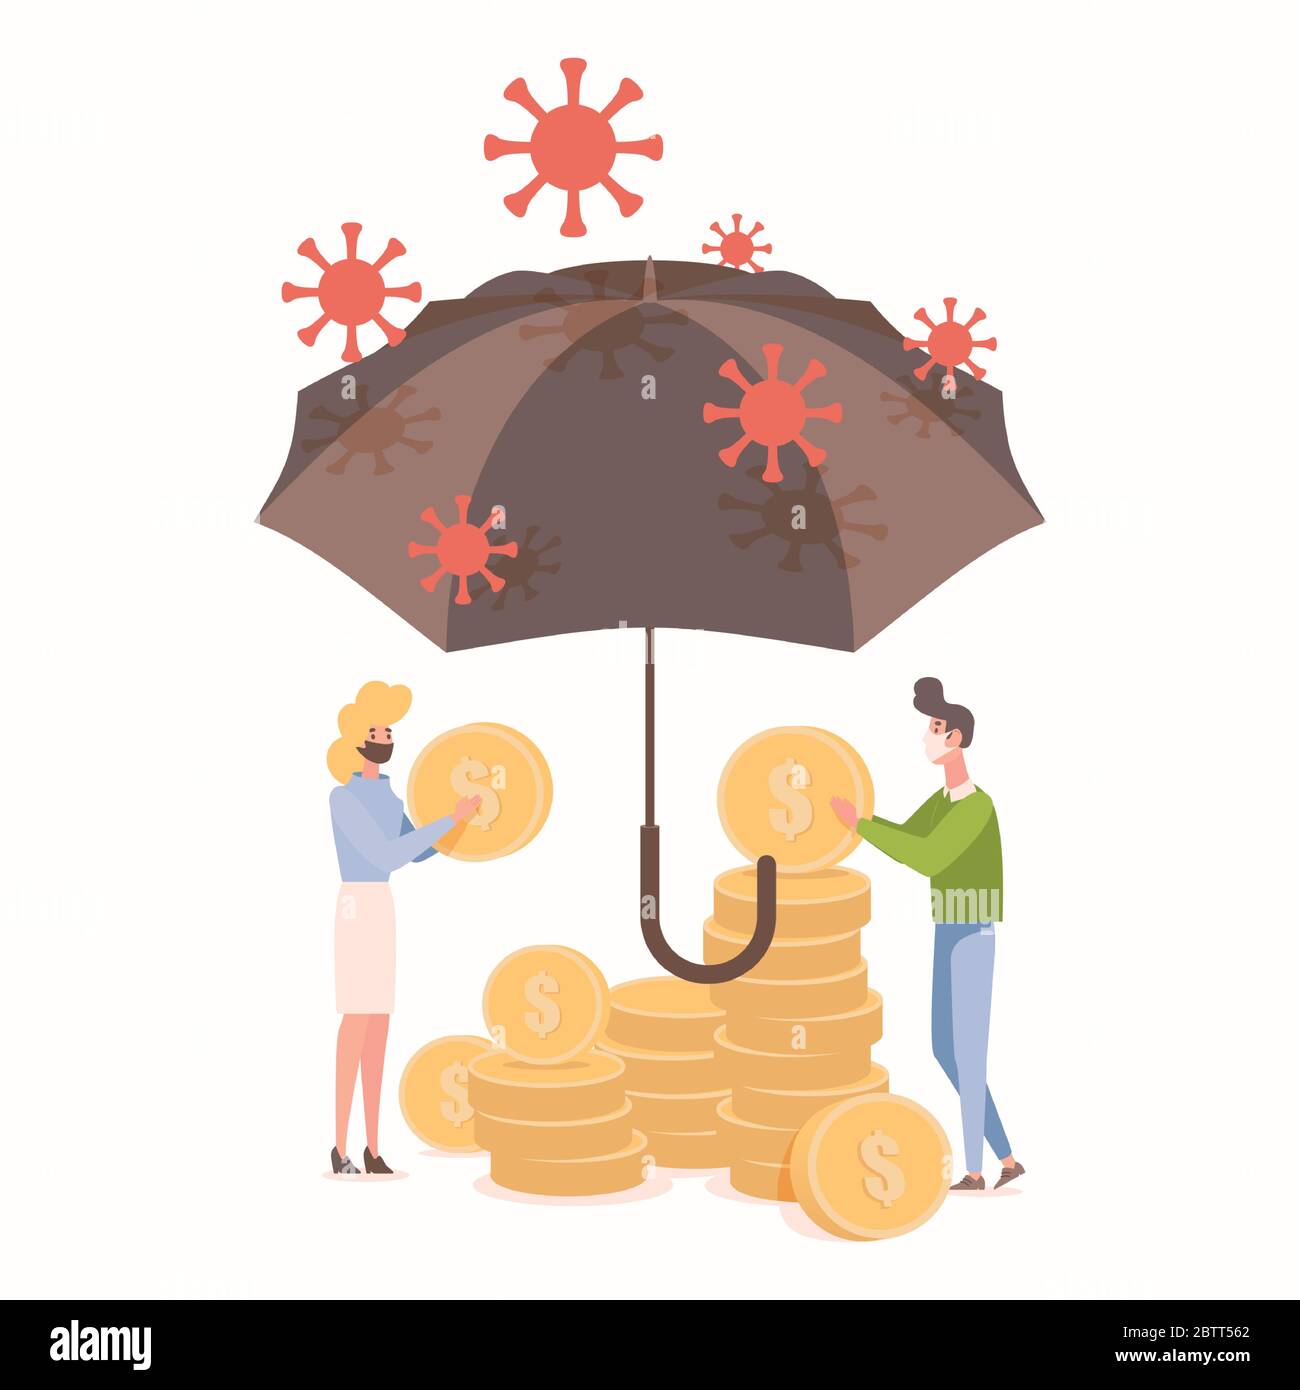 People protect savings from coronavirus epidemic outbreak vector flat illustration. Young woman and man in protective masks hold gold coins in hands. Umbrella against the rain of covid-19 cells. Stock Vector